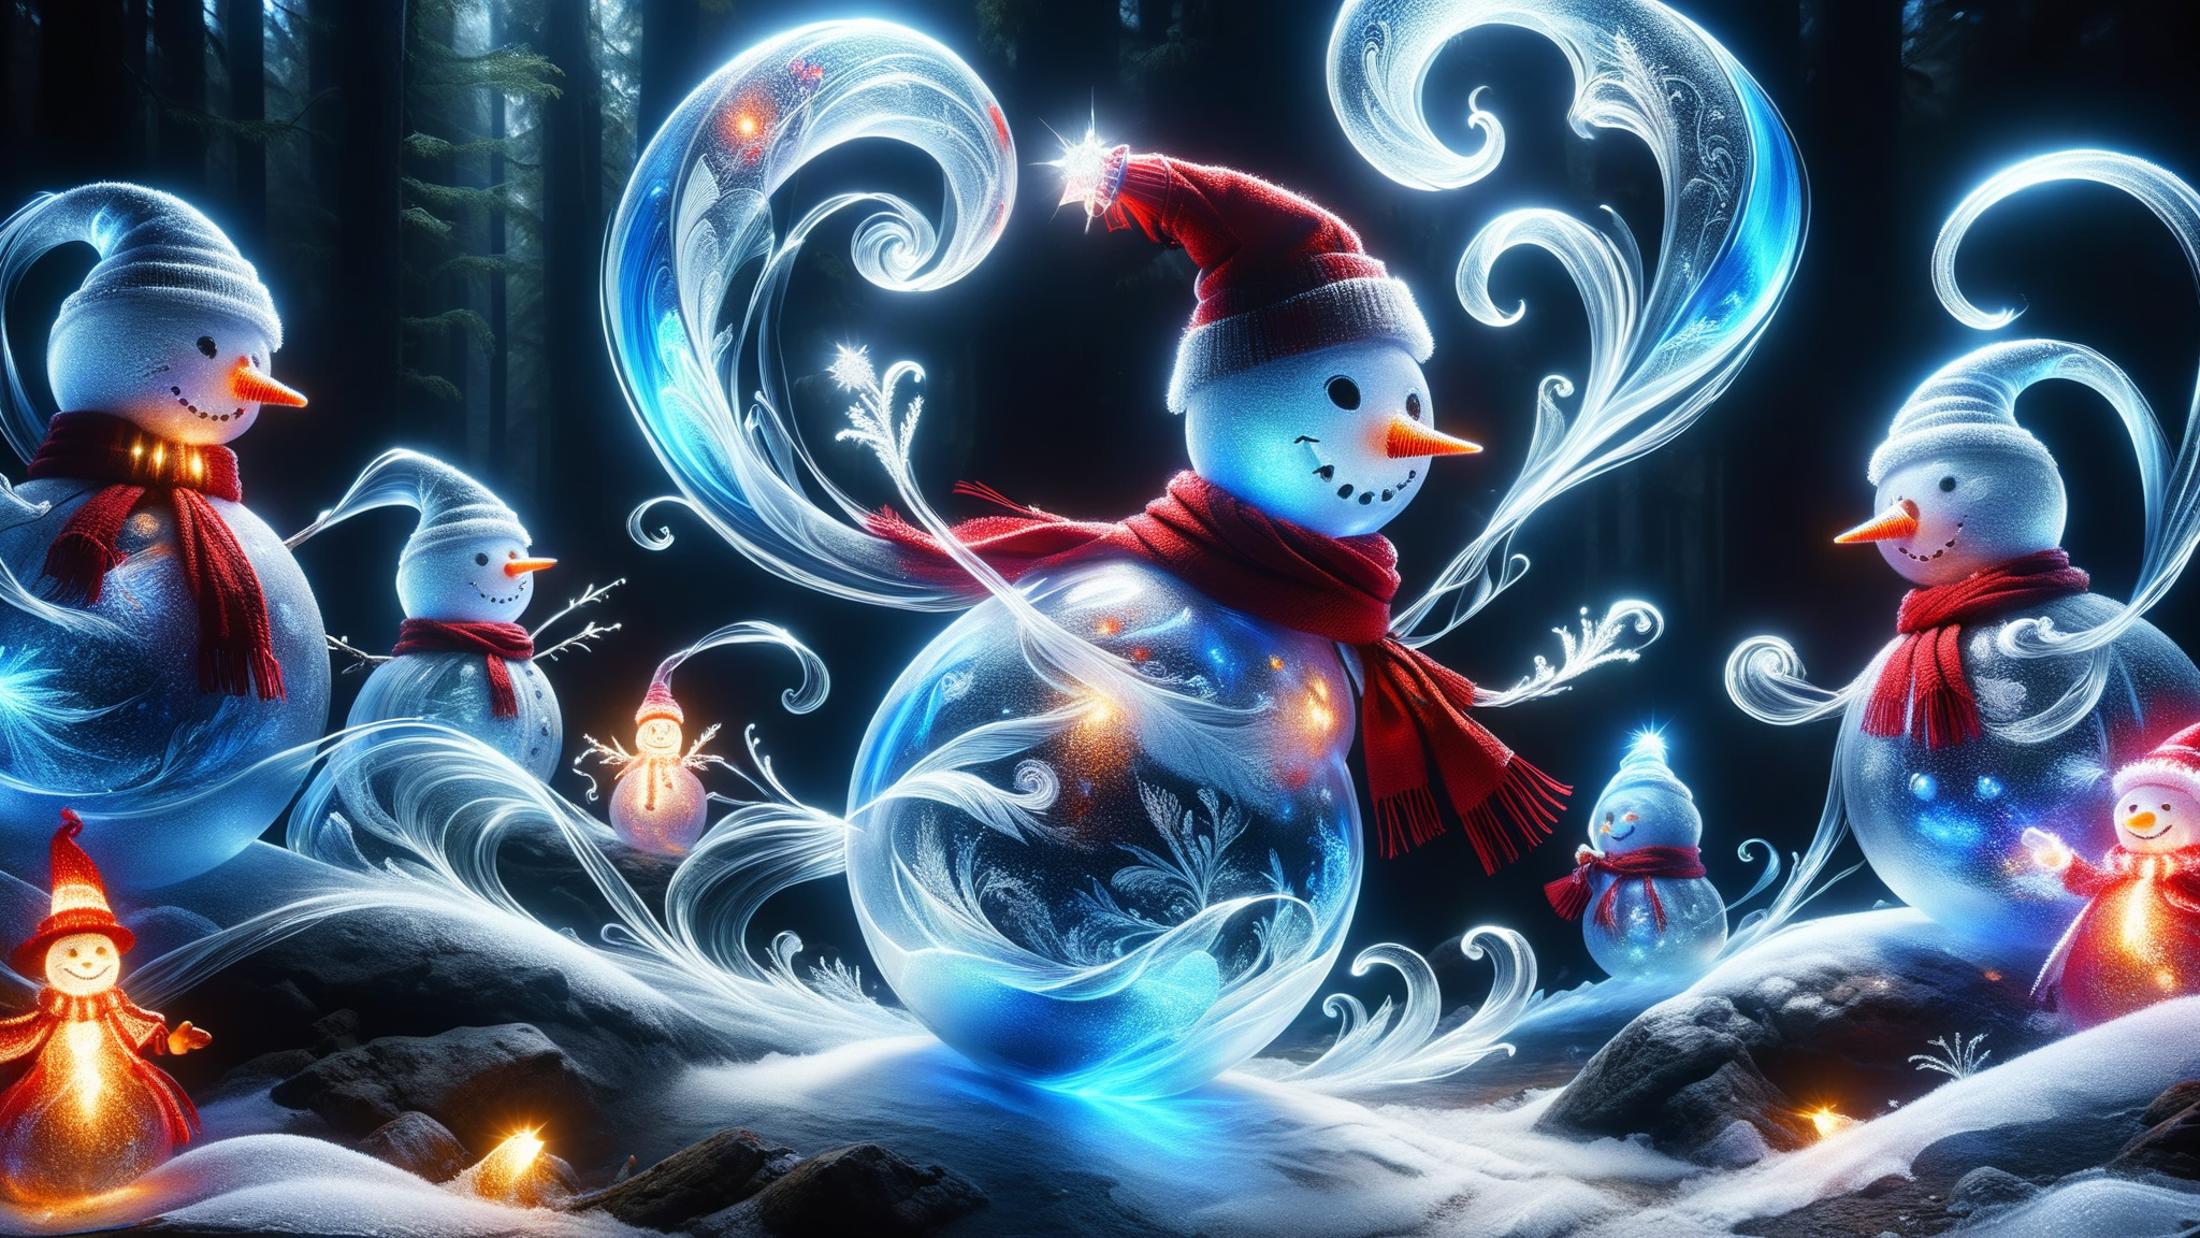 A Snowman with a Scarf and Santa Hat in a Christmas Scene.